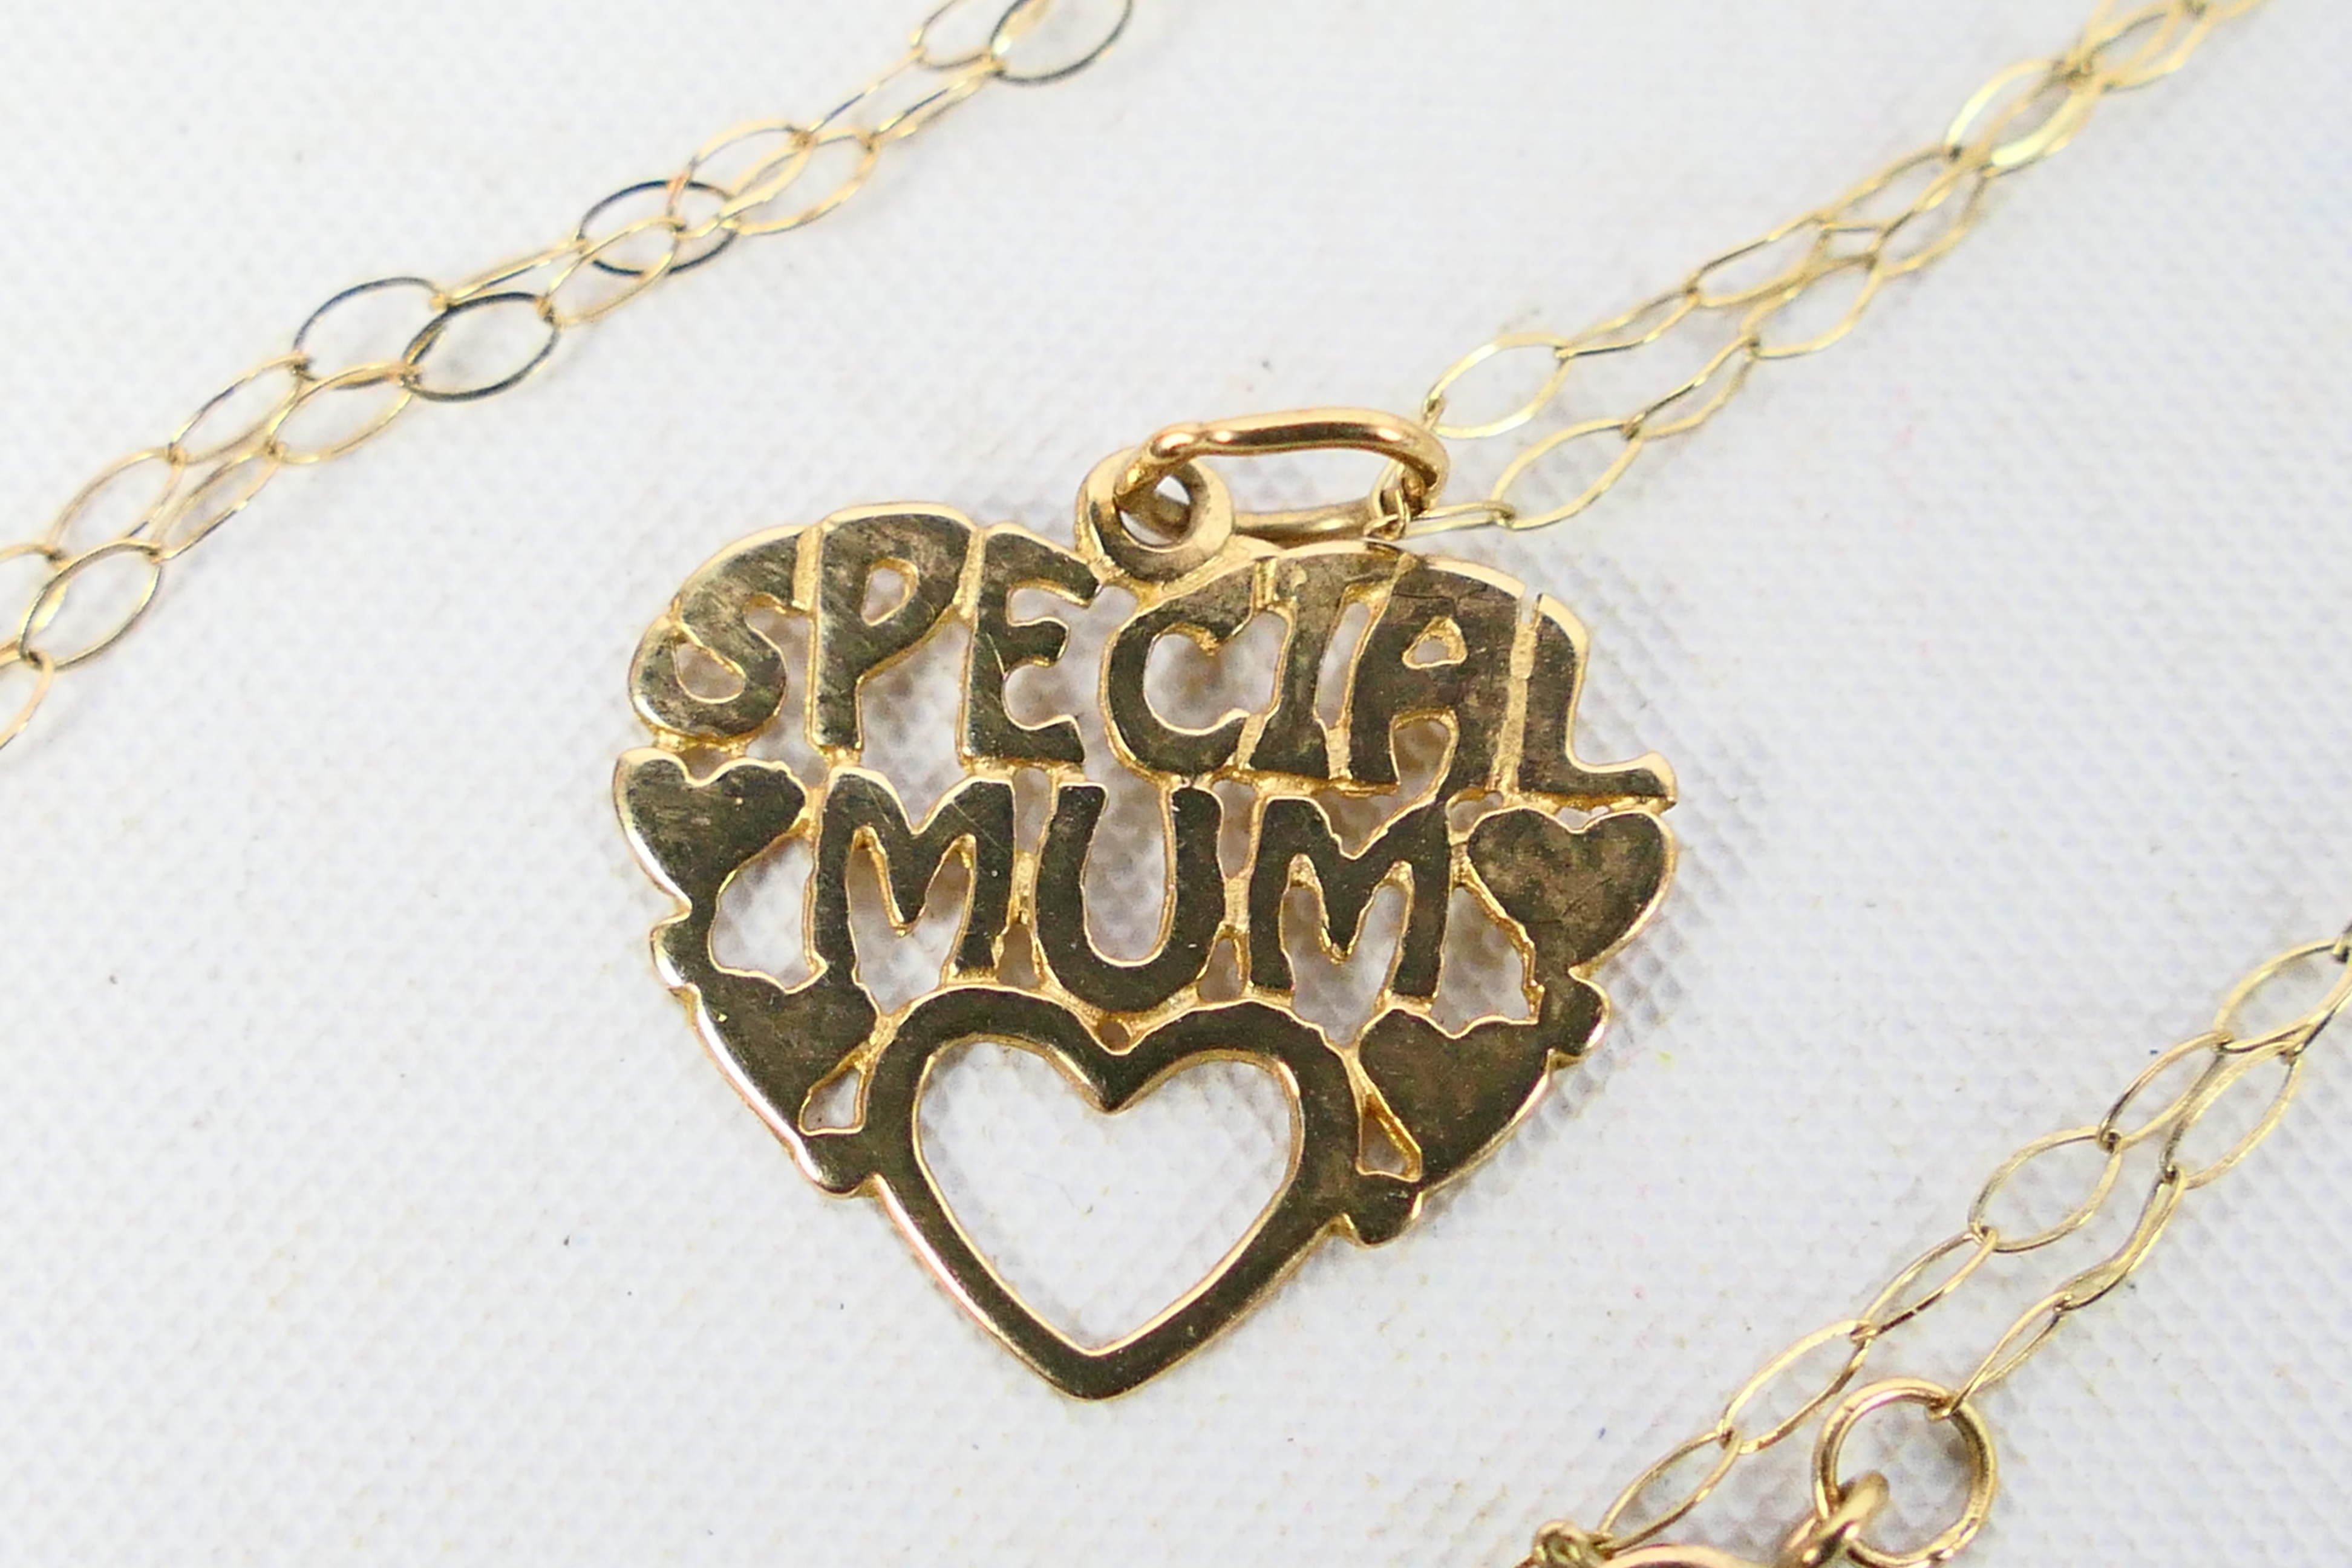 Four fine trace necklace chains one with Special Mum pendant, - Image 5 of 5